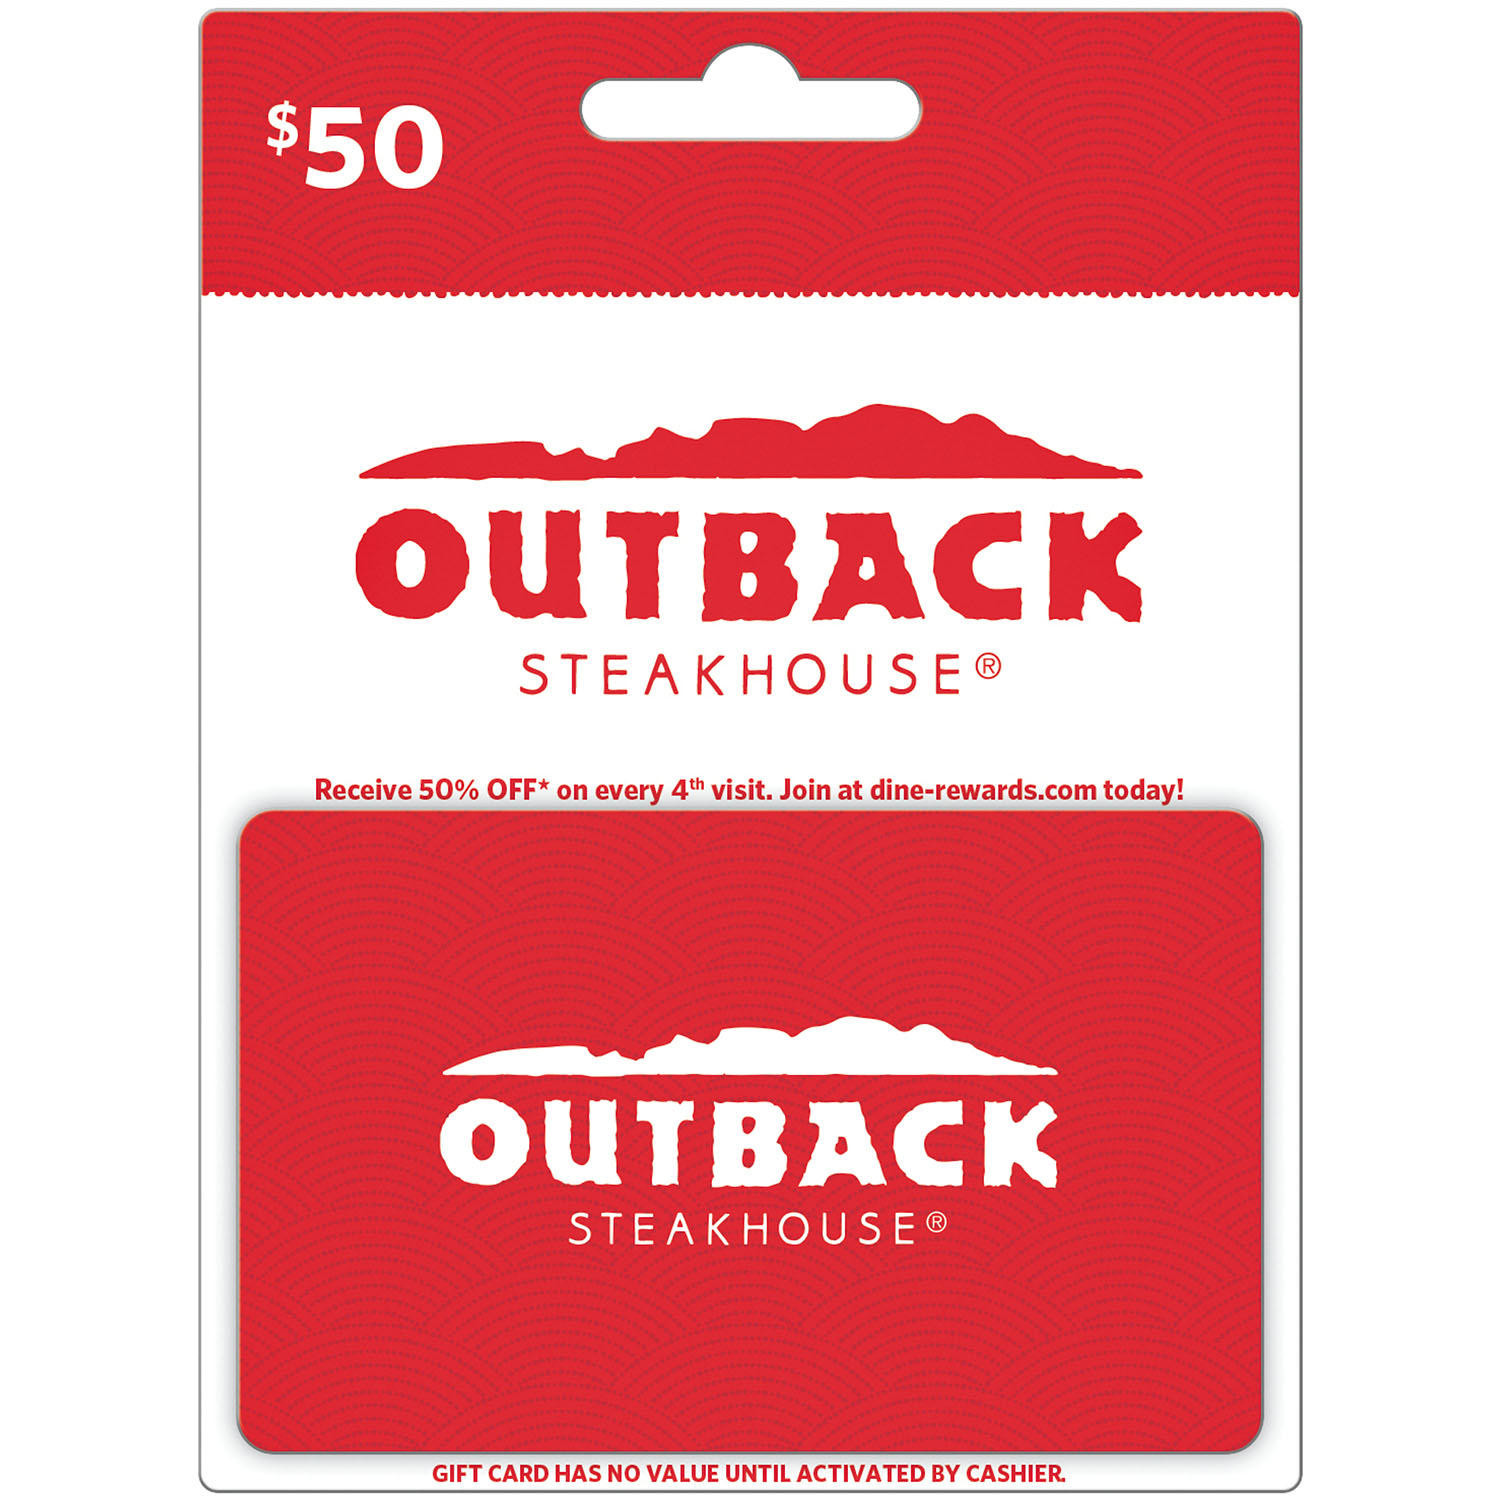 OUTBACK $50 GC